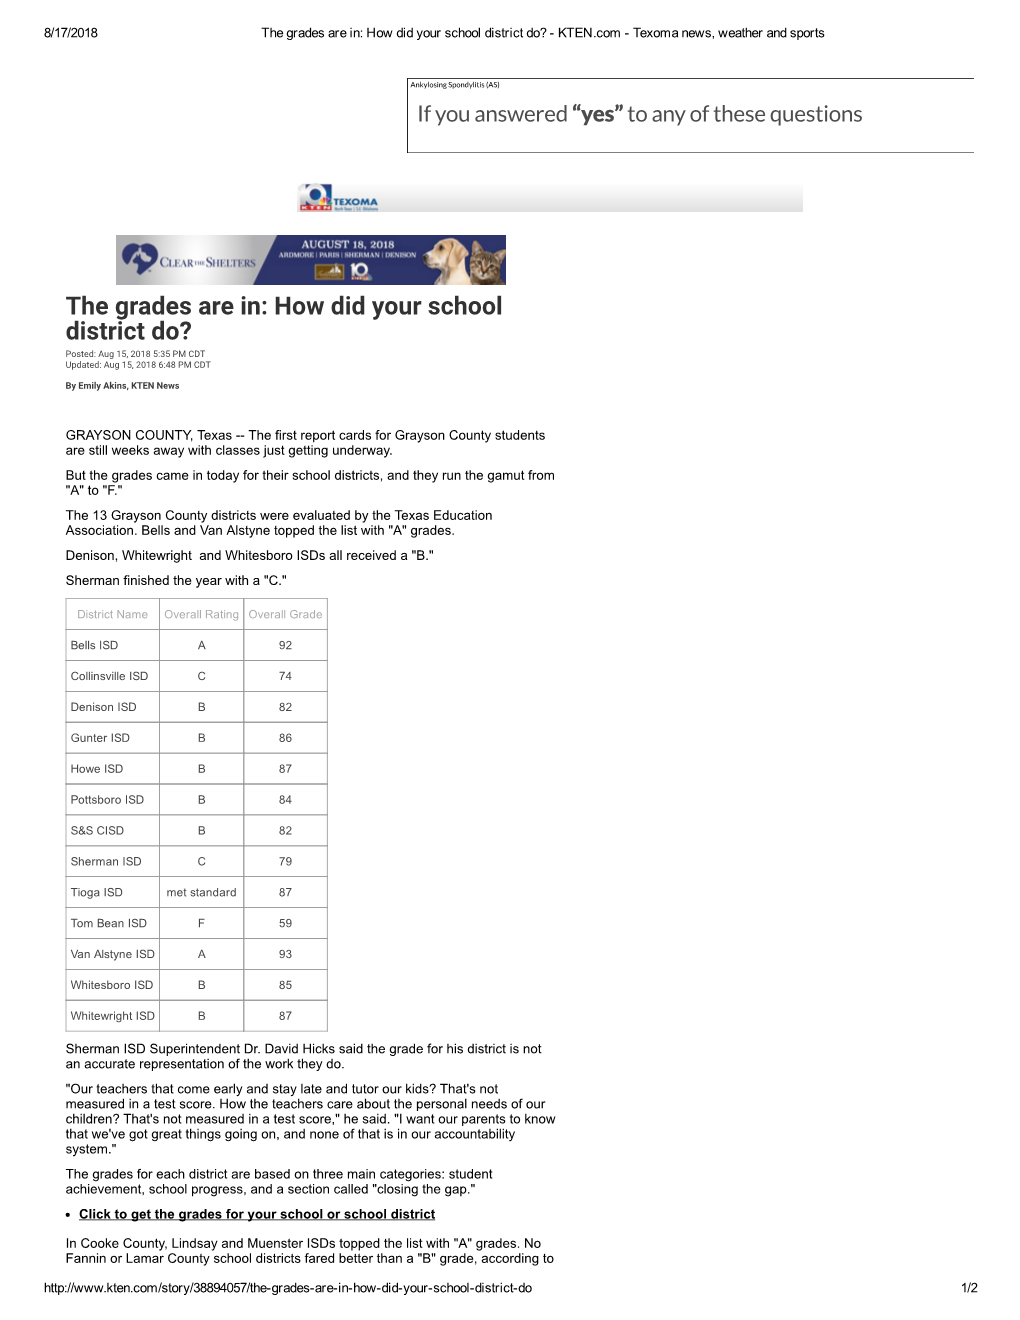 The Grades Are In: How Did Your School District Do? ­ KTEN.Com ­ Texoma News, Weather and Sports